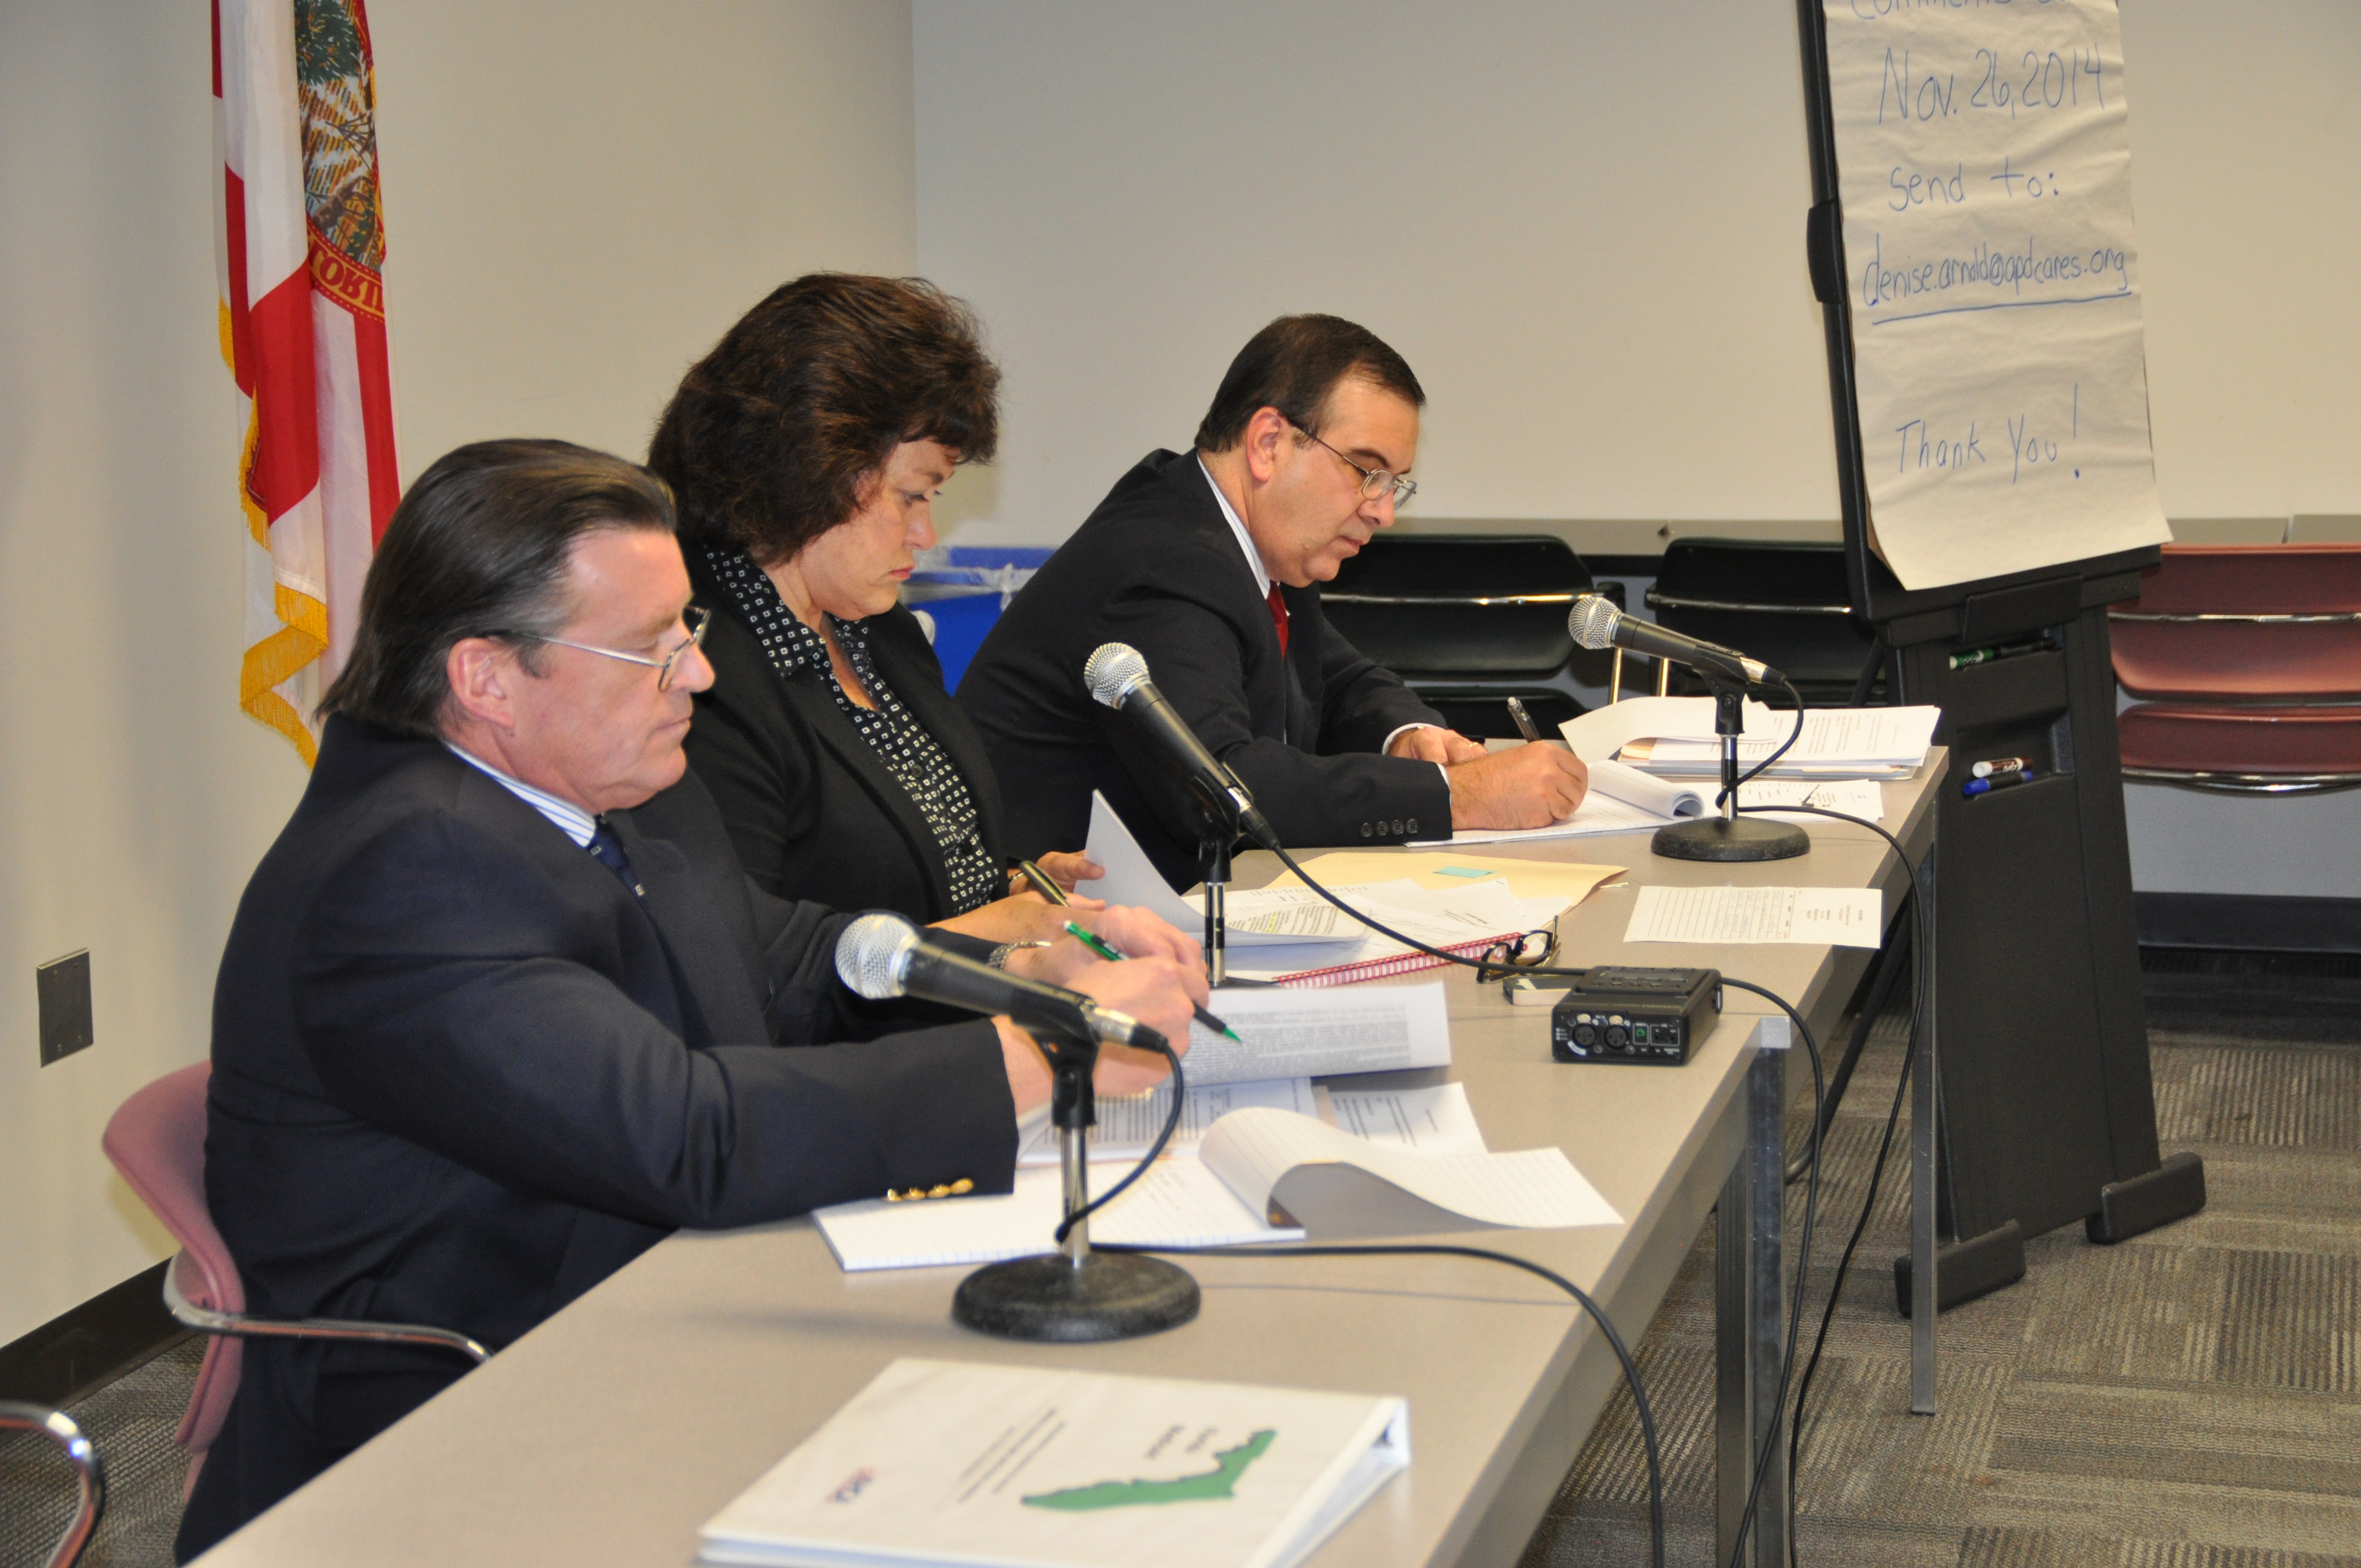 Deputy General Council Brian McGrail, Deputy Director of Programs Denise Arnold, and Senior Attorney David DeLaPaz chaired the iBudget workshop.